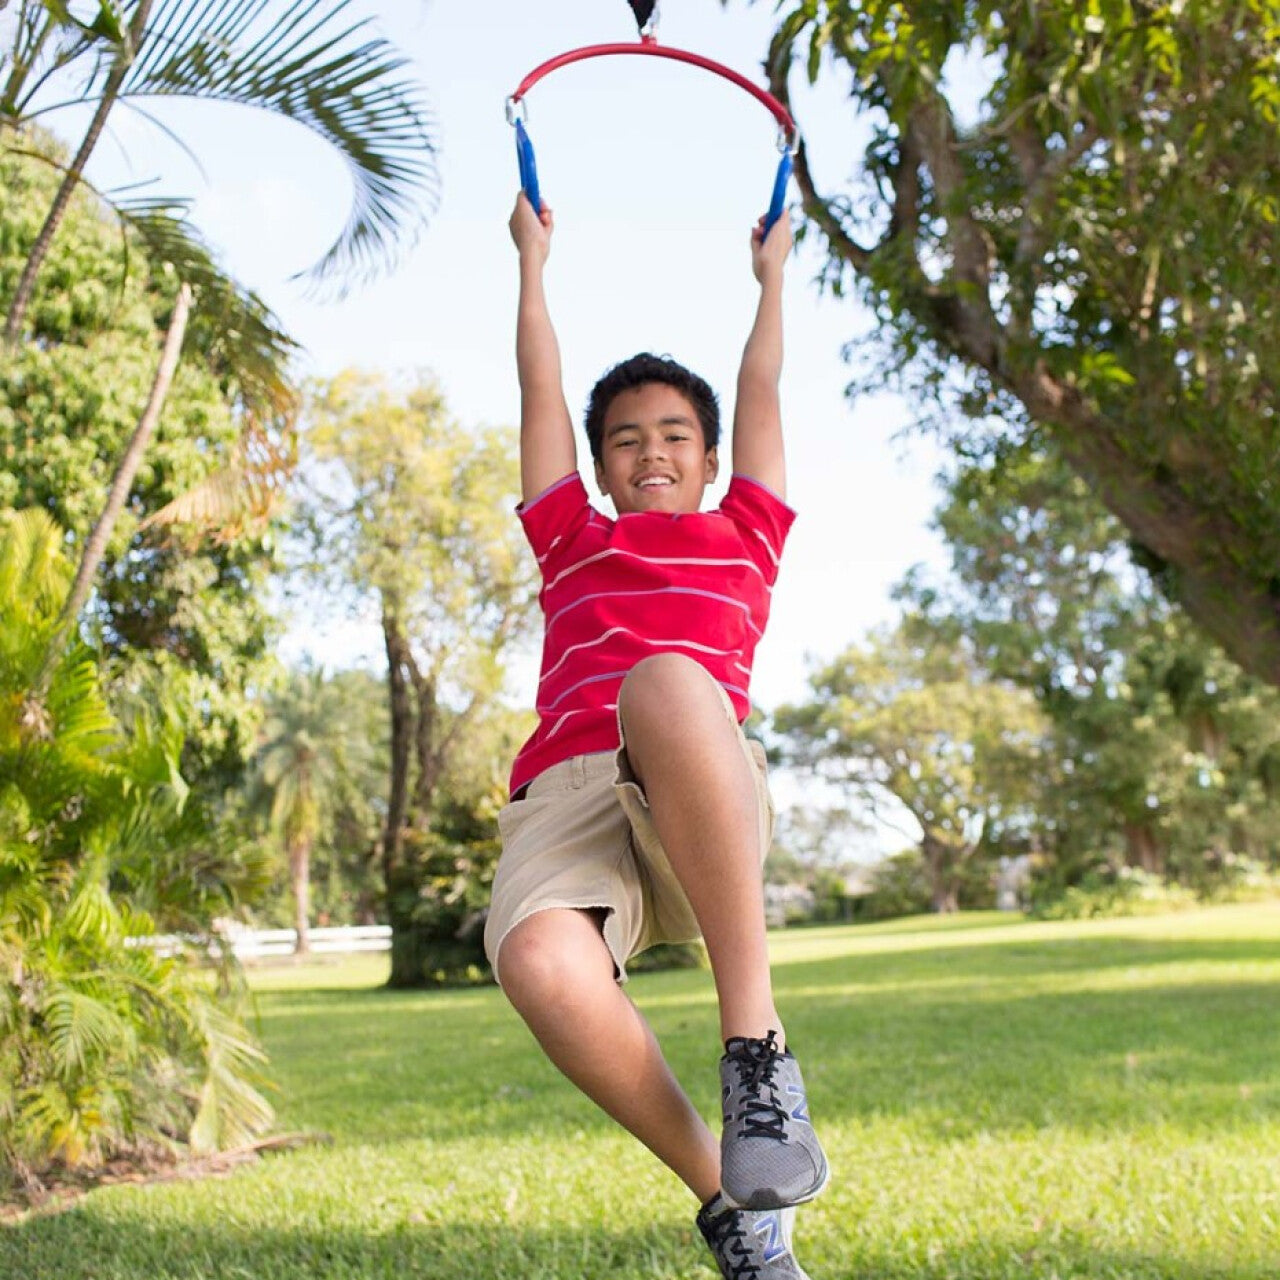 A child with medium light skin and short brown hair hangs from the Hanging Rings. They swing forward as they dangle.